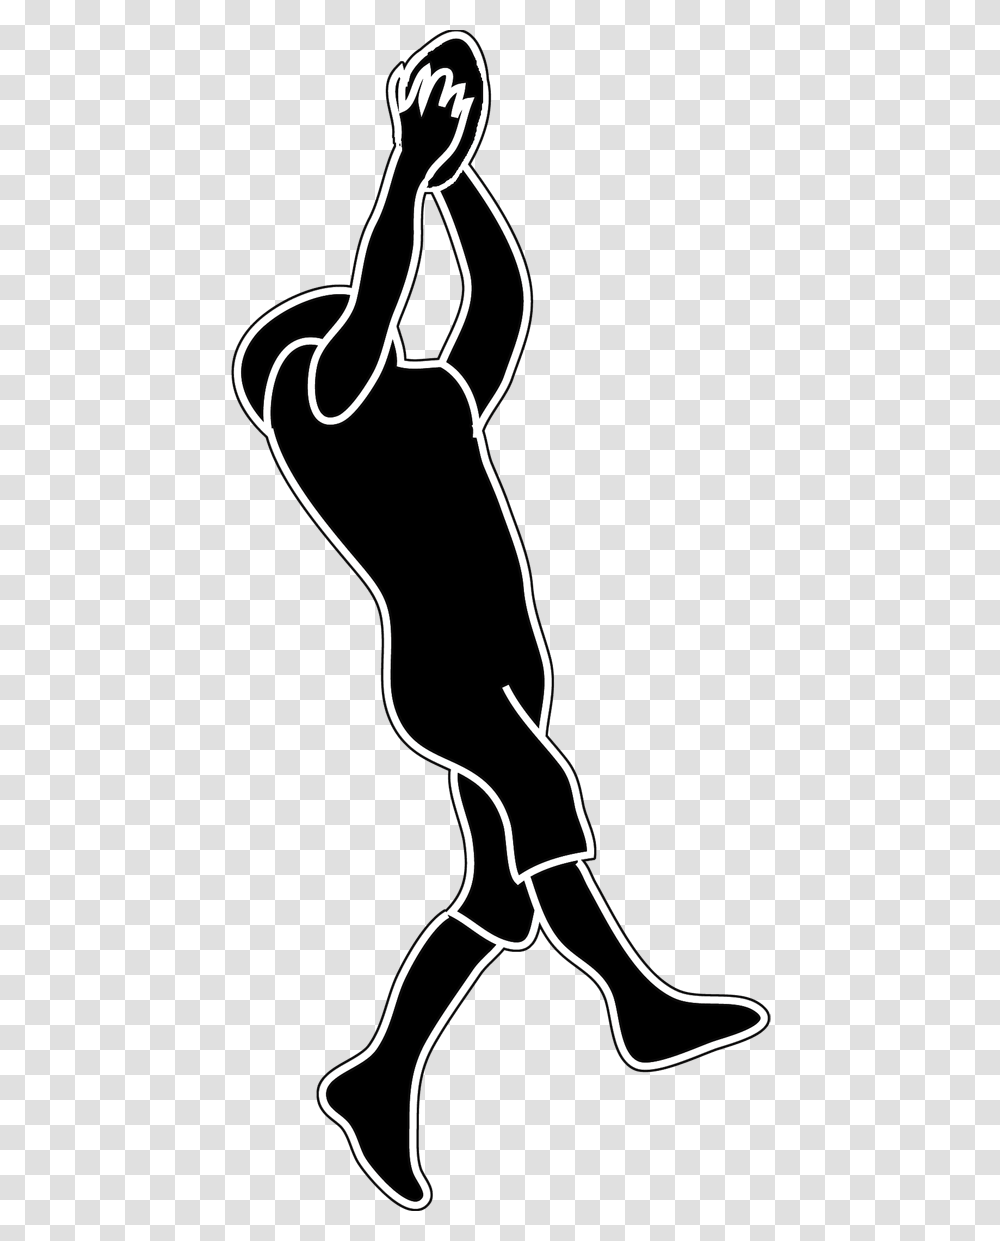 Female Singer Silhouette Silhouette Football Player, Hand, Fist Transparent Png